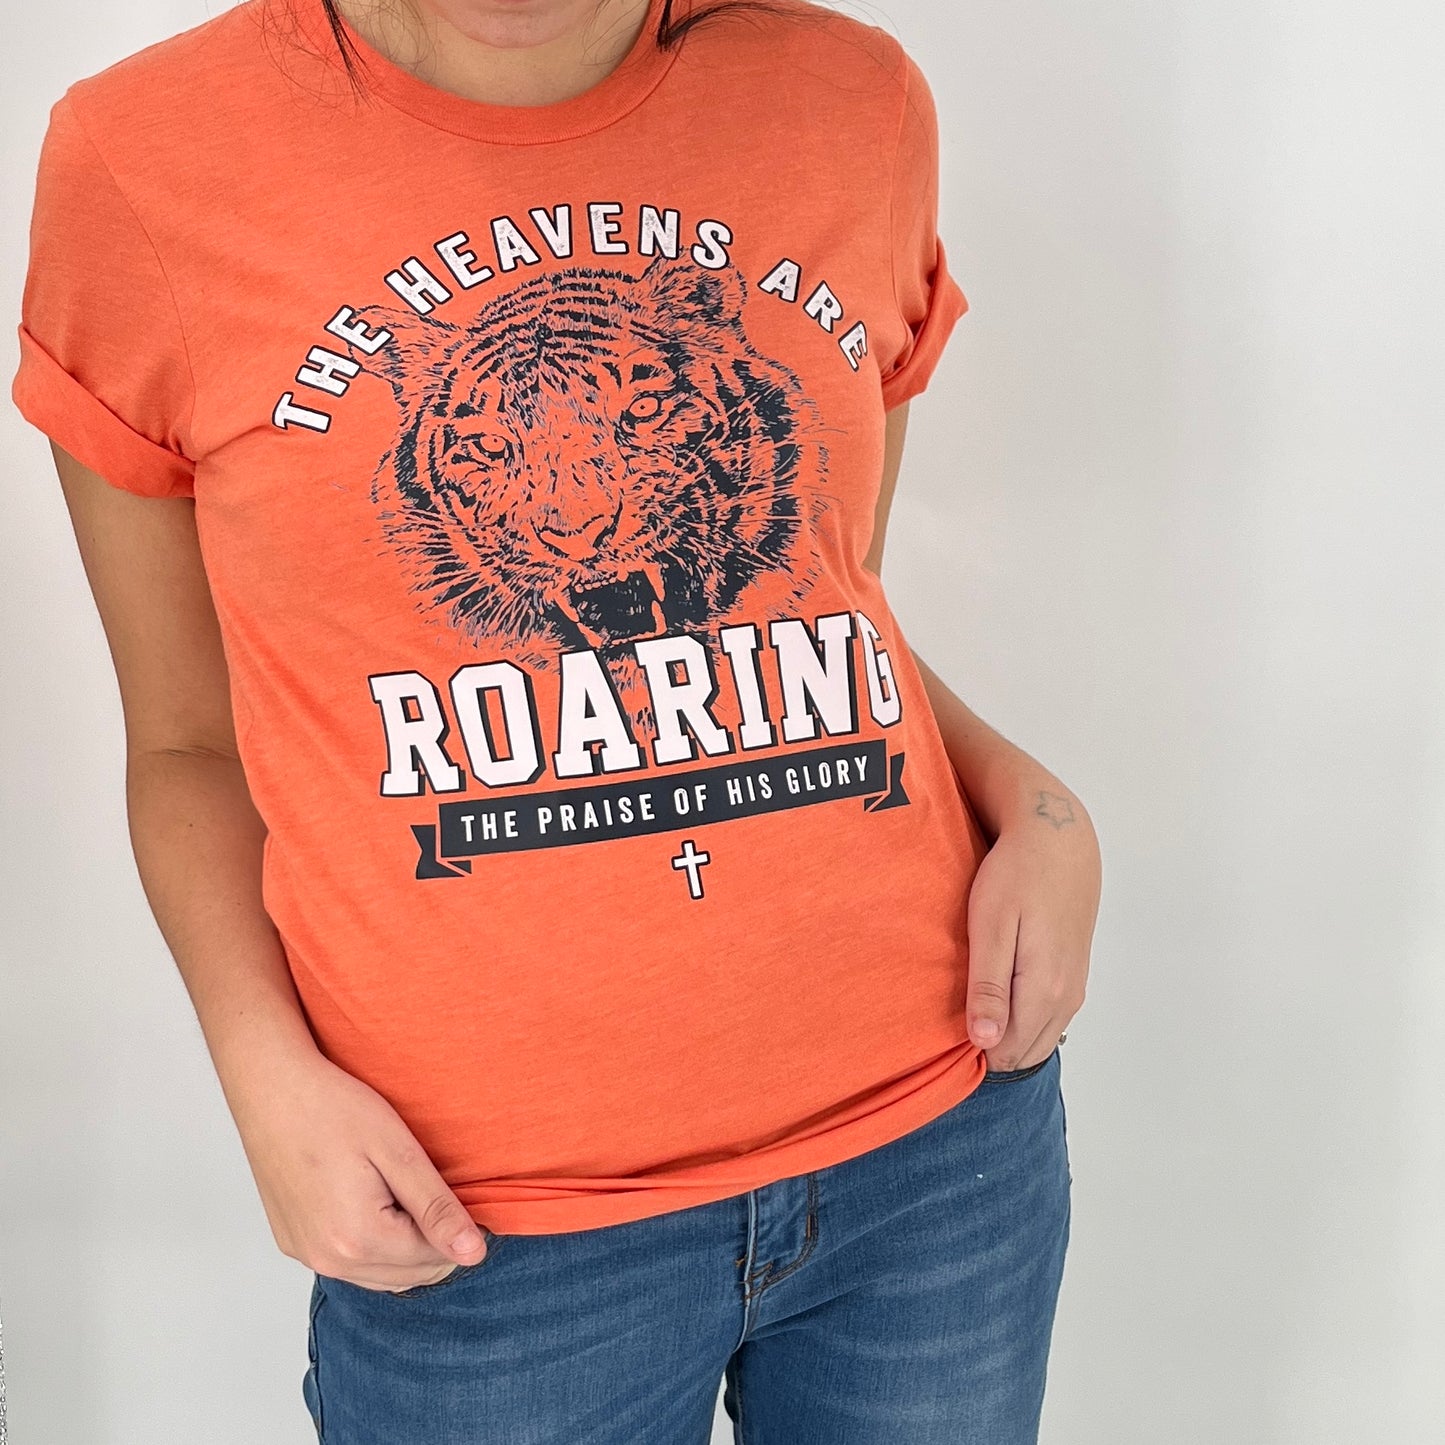 The heavens are roaring (Tiger) tee